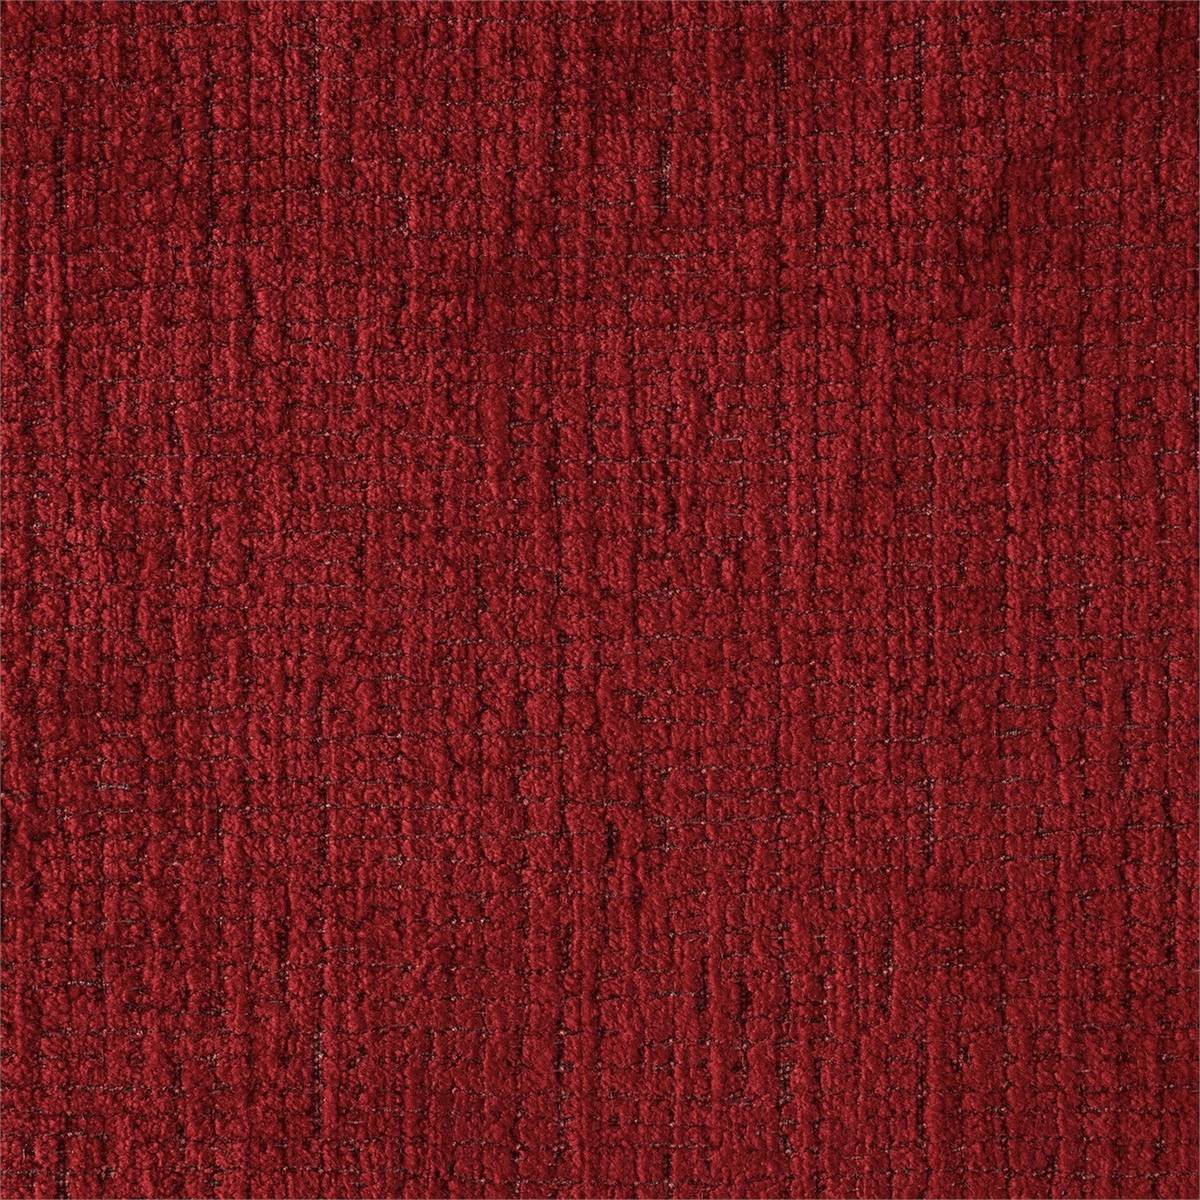 Tessella Red Fabric by Sanderson